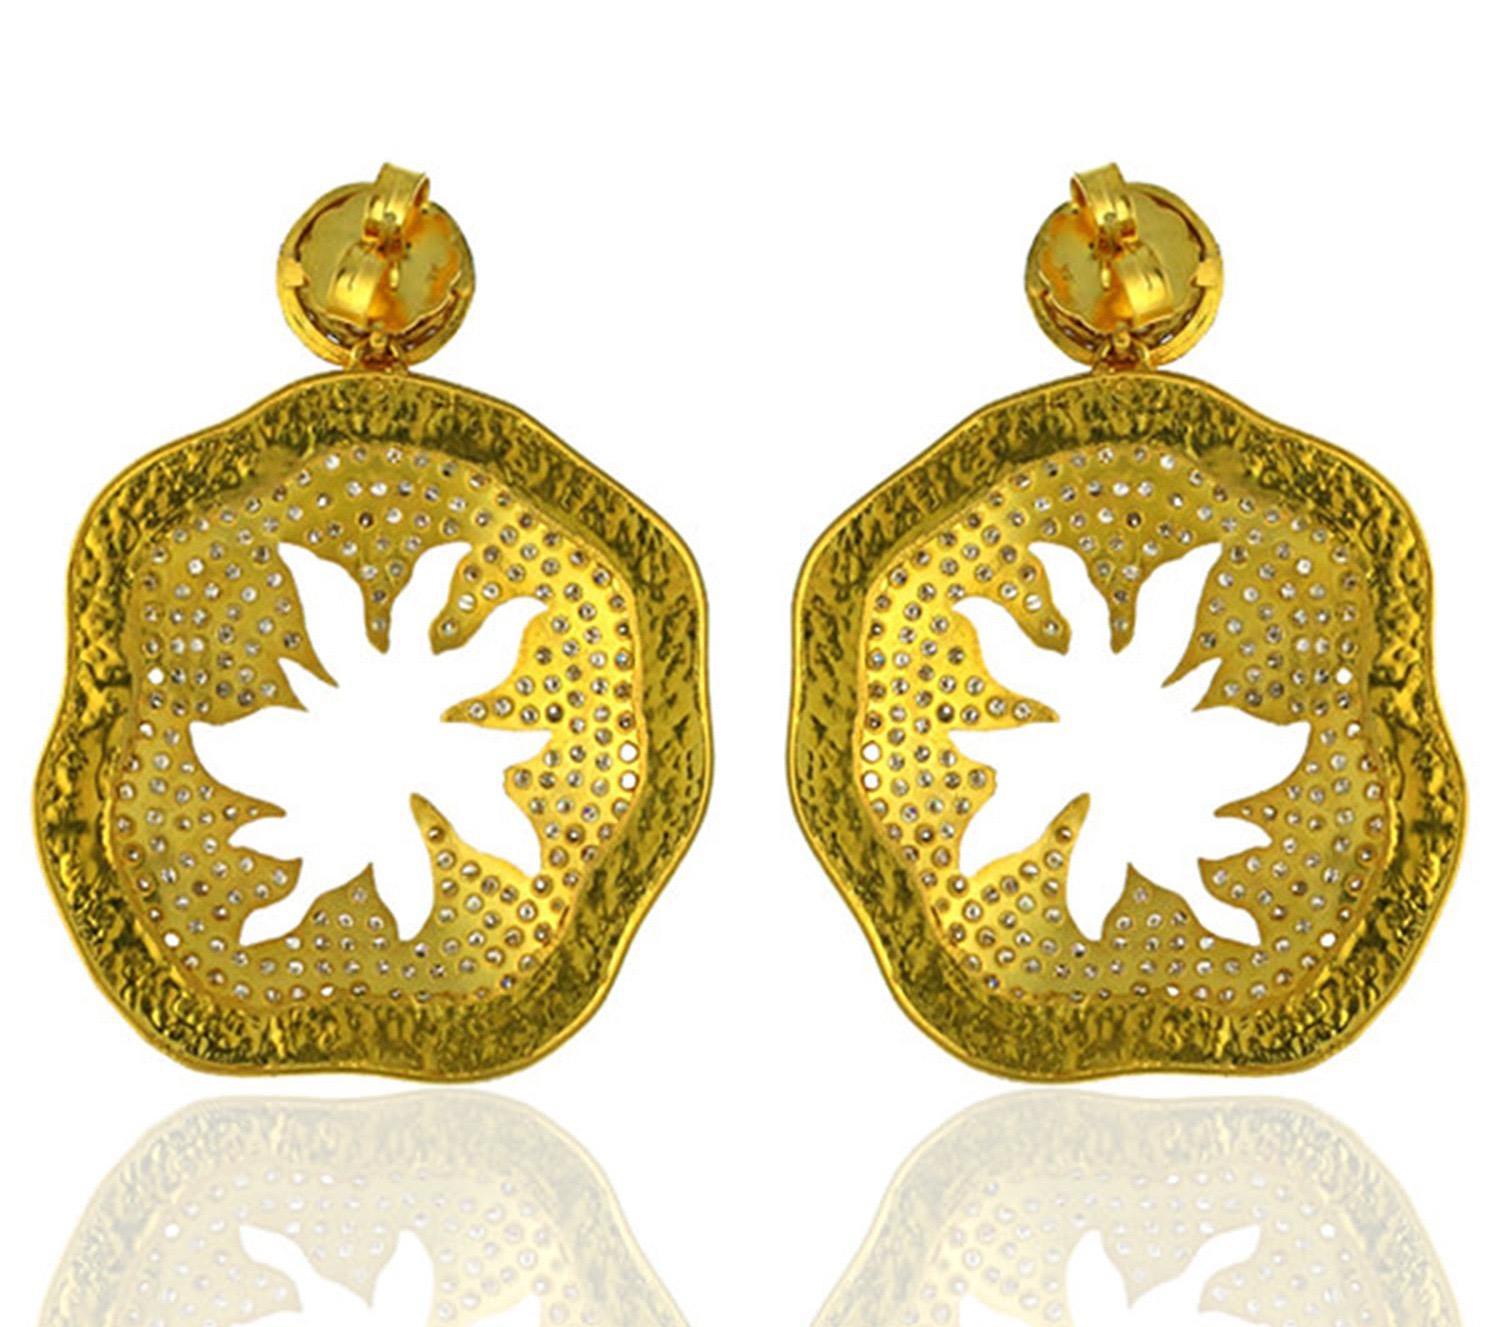 Handcrafted from 18-karat gold, these palm earrings are set with 3.63 carats of glimmering diamonds. The hammered gold is contrasted beautifully with blackened finish.

FOLLOW  MEGHNA JEWELS storefront to view the latest collection & exclusive